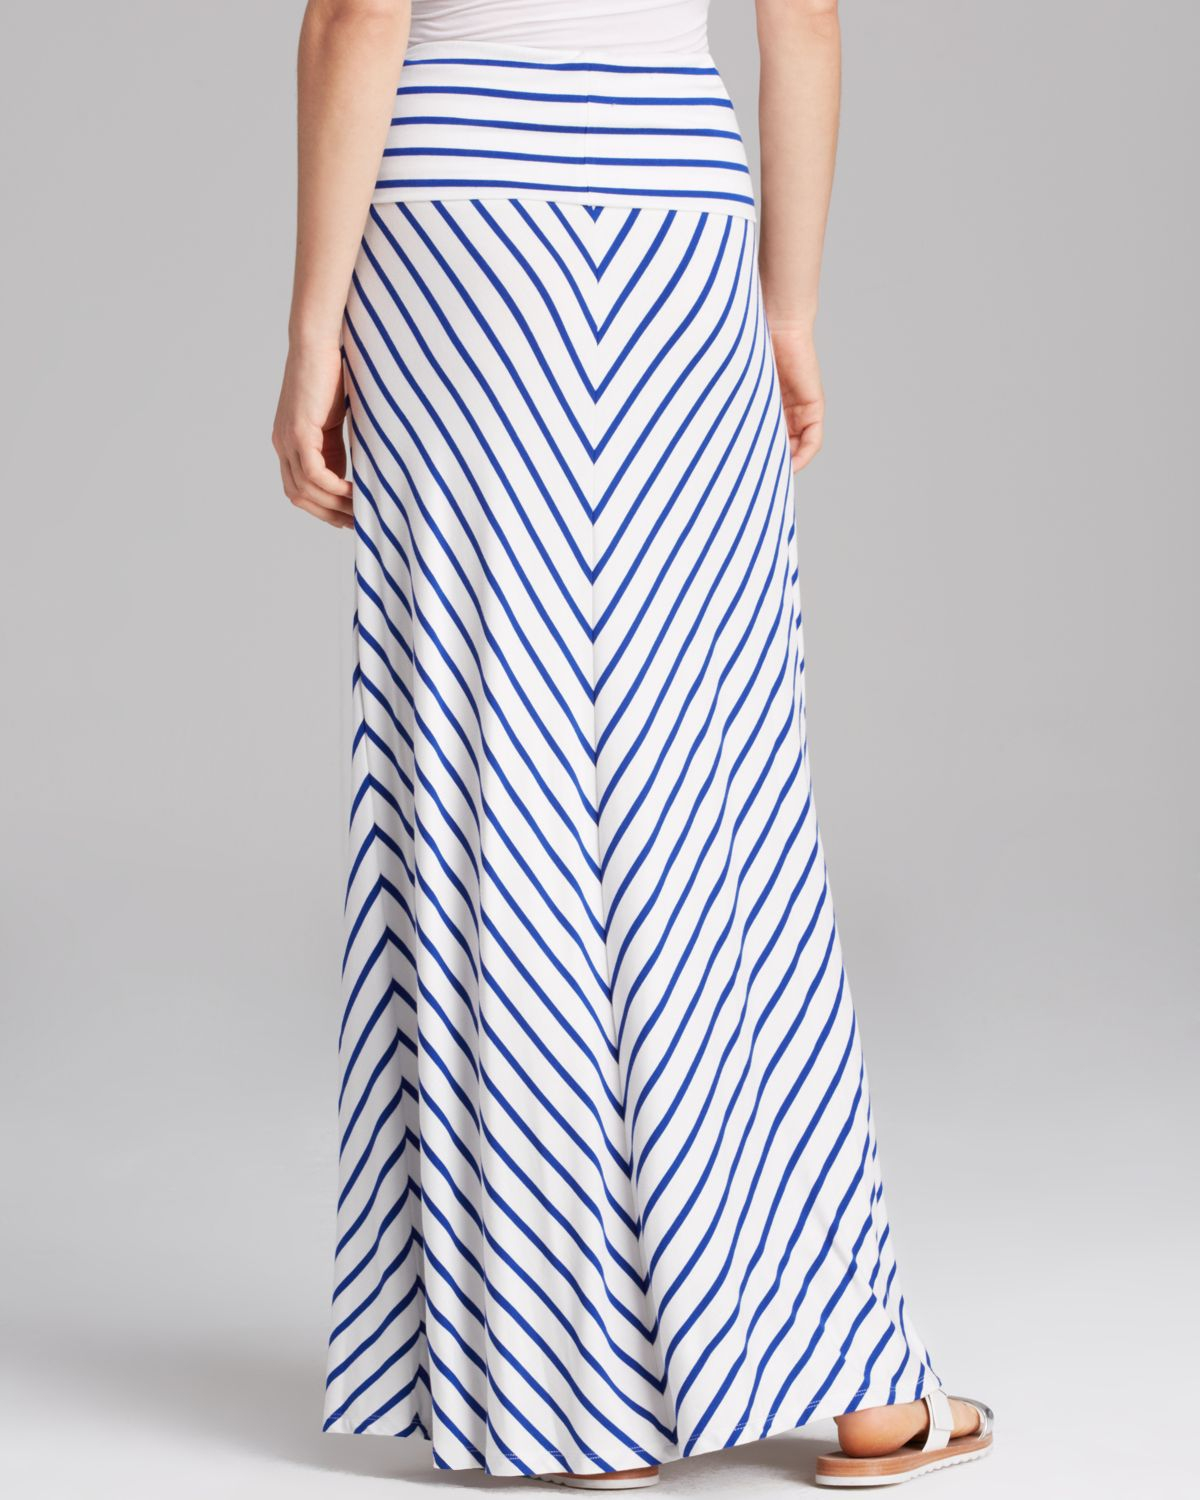 Blue And White Maxi Skirt - Skirts